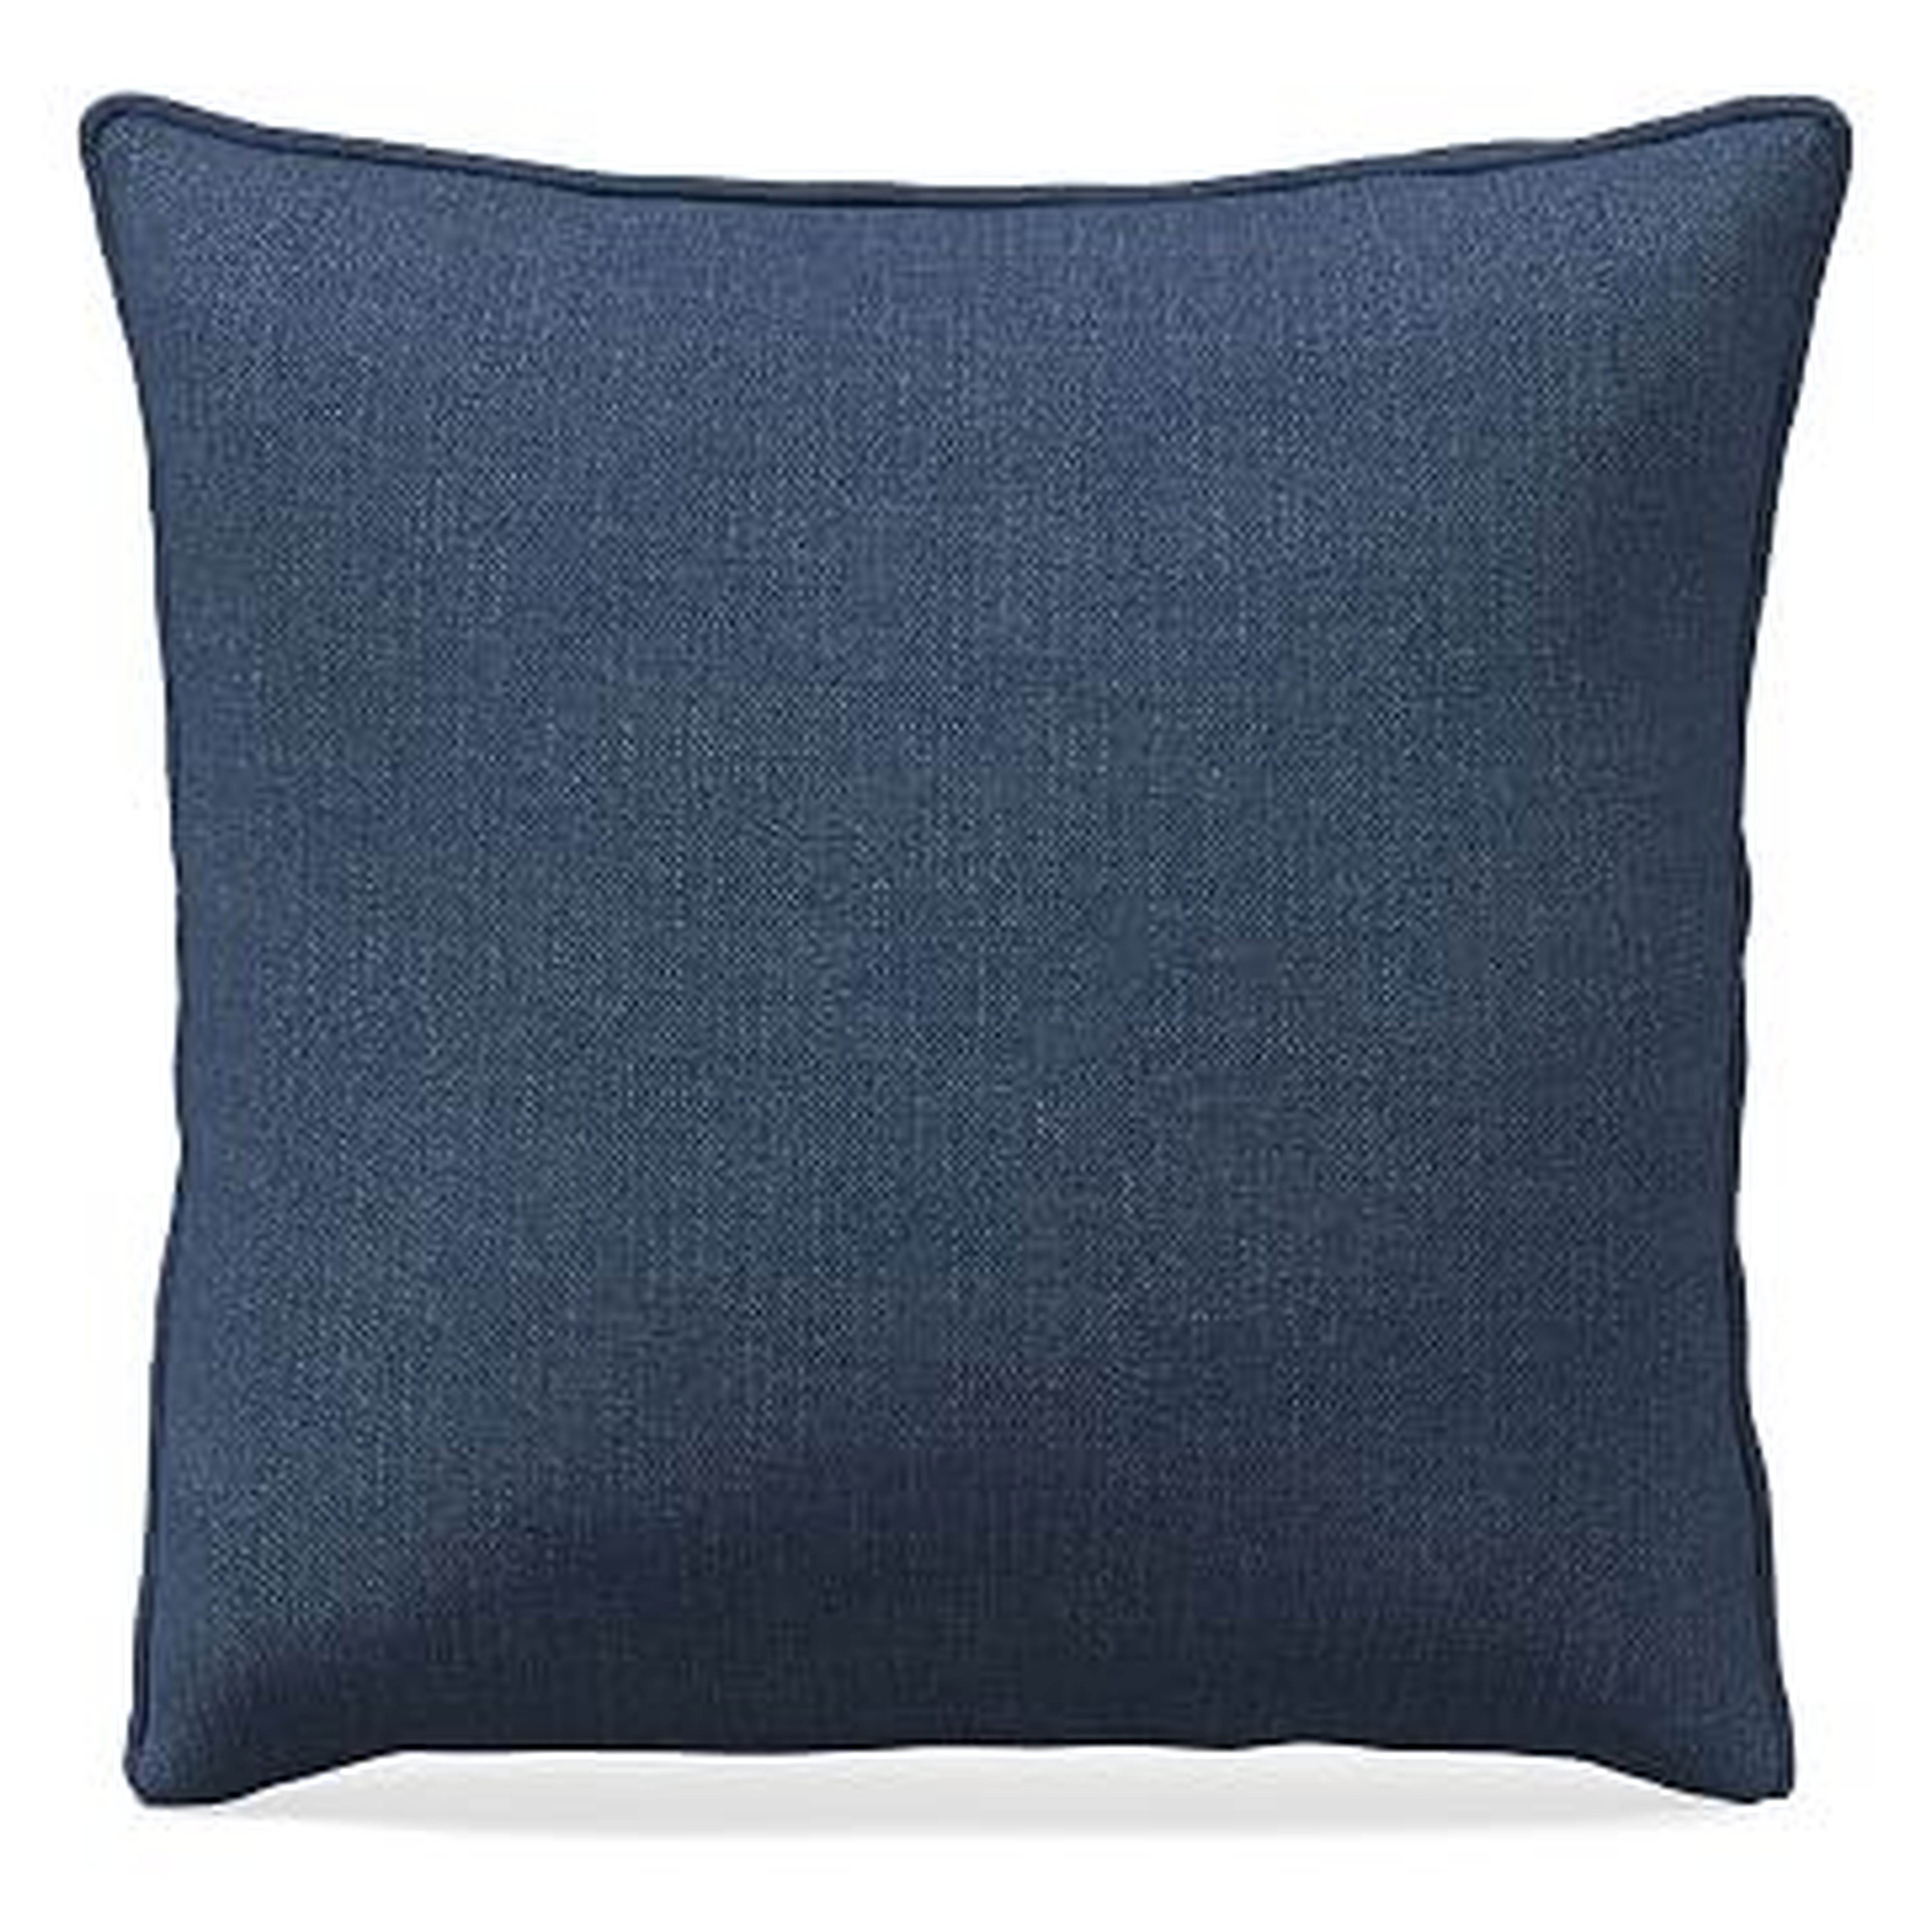 18"x 18" Welt Seam Pillow, Performance Yarn Dyed Linen Weave, French Blue - West Elm